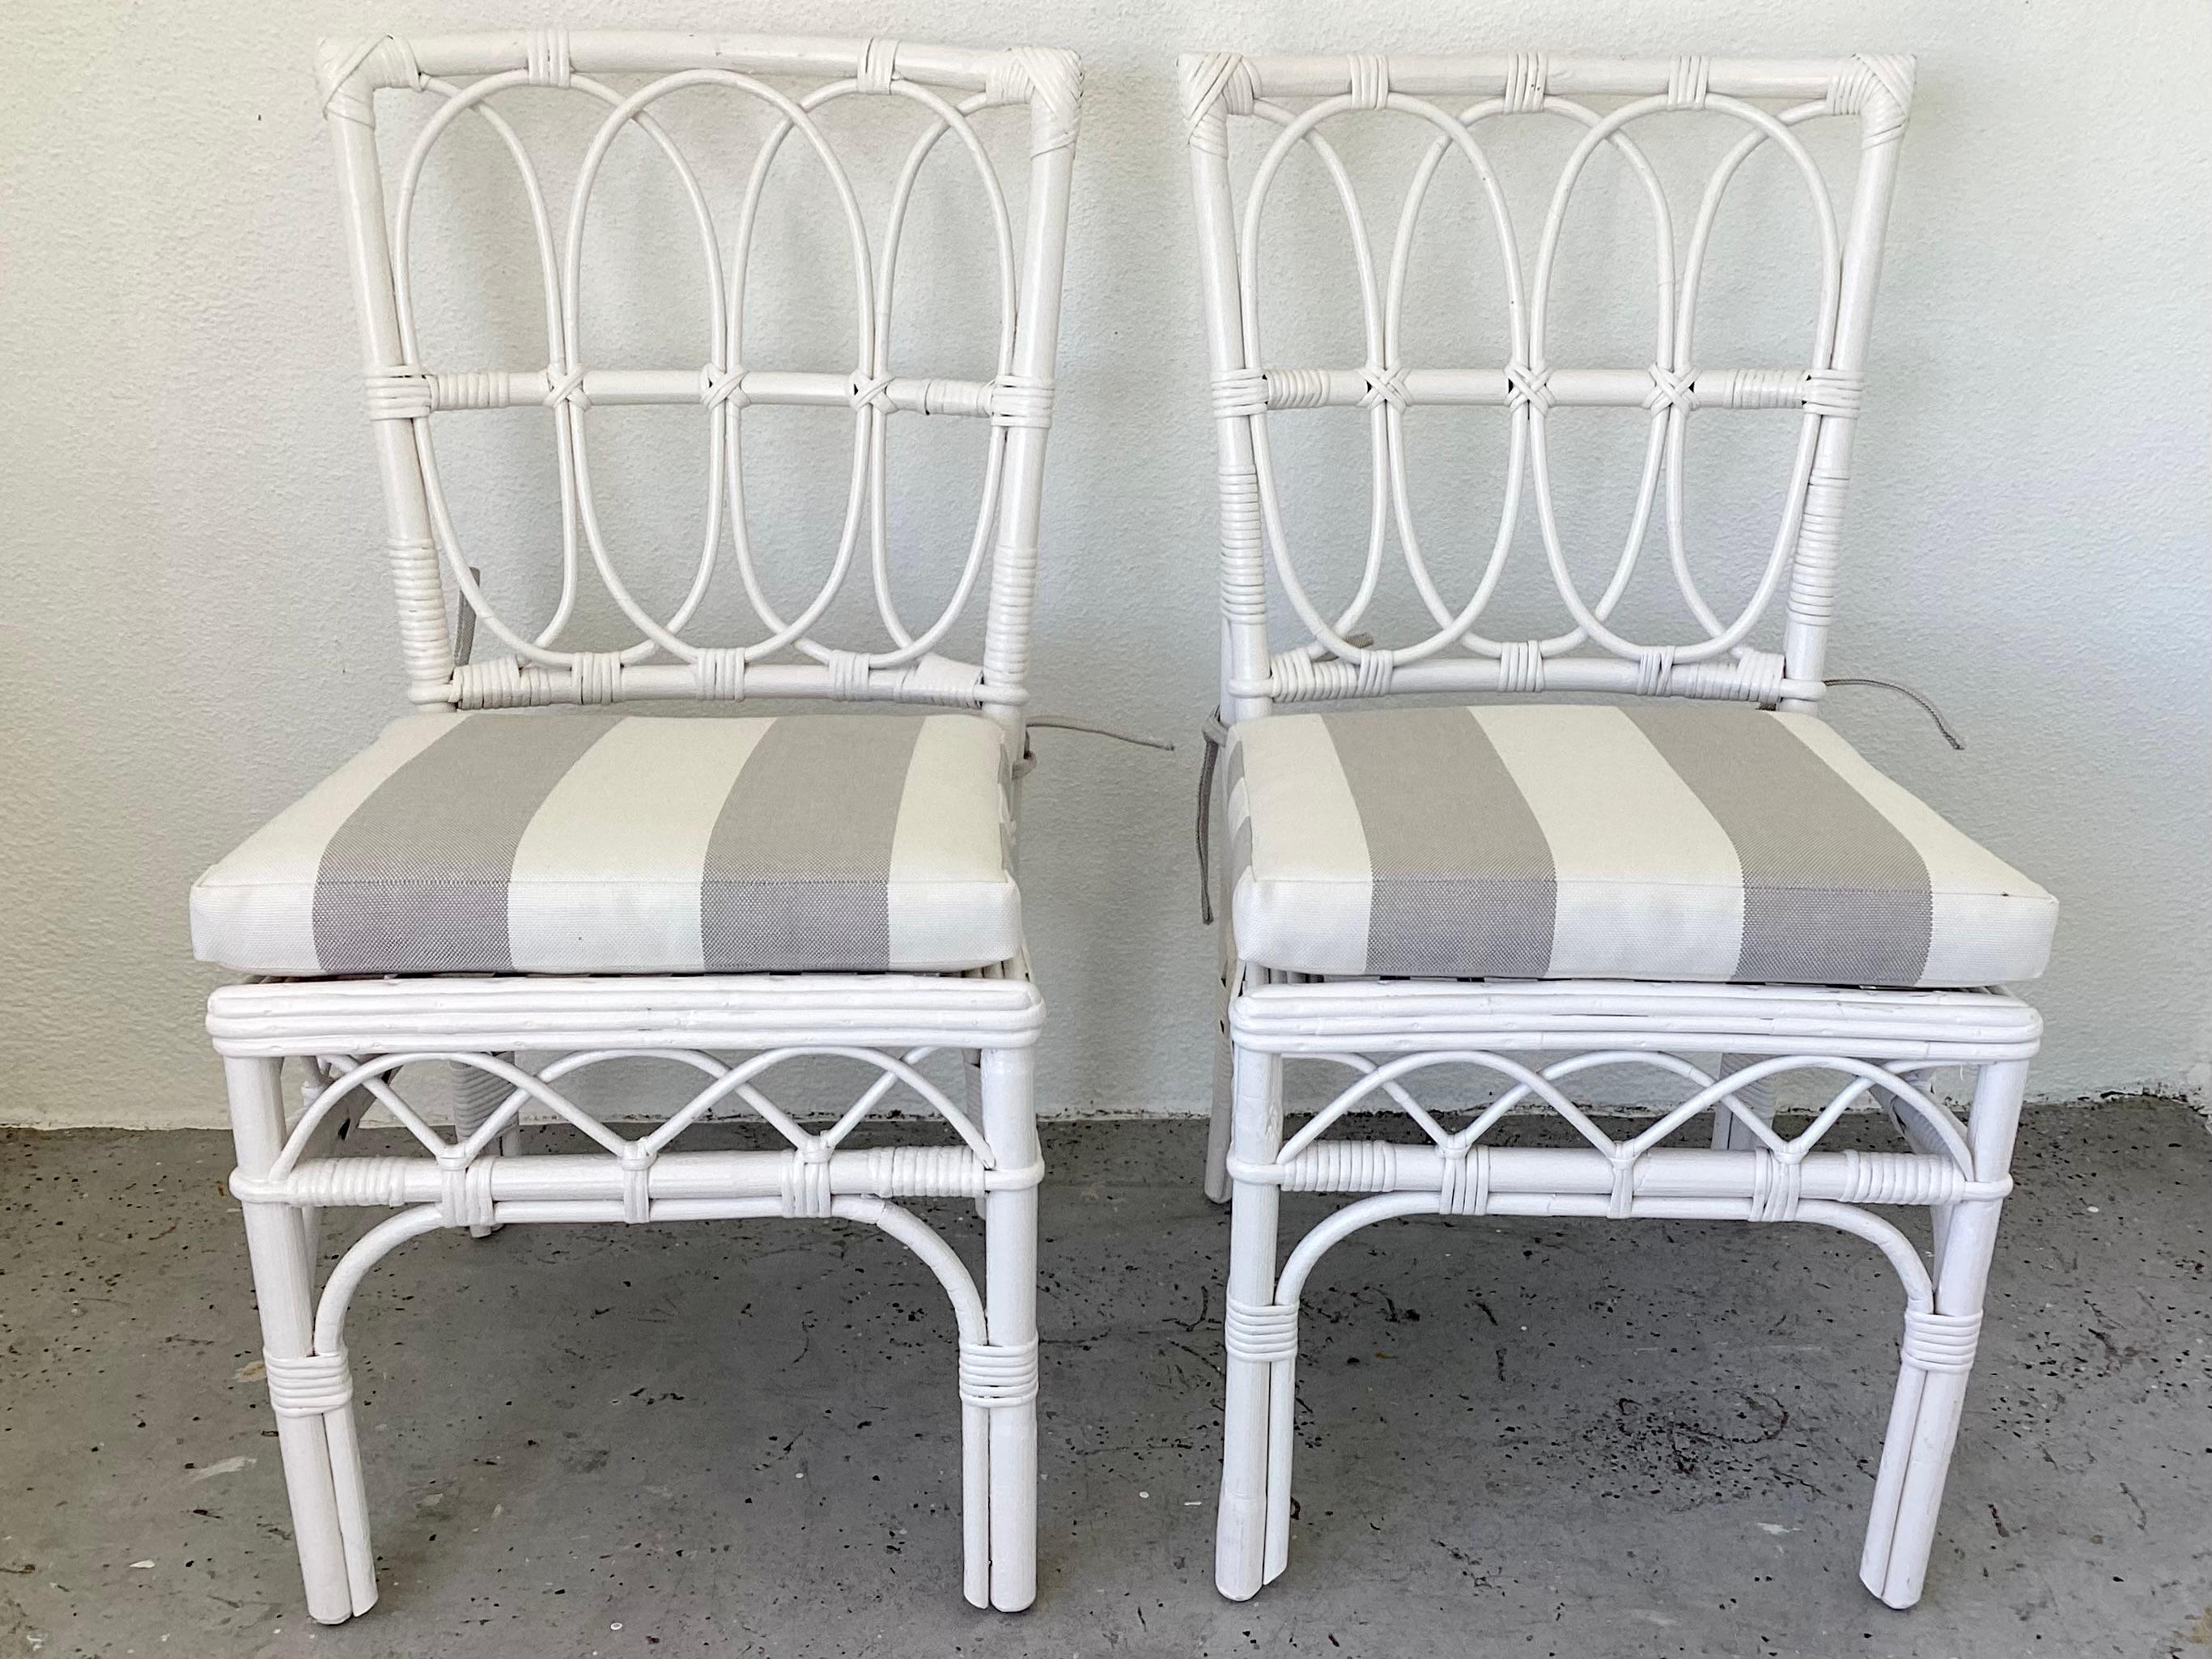 Fabulous pair of Ficks Reed boho chic rattan side chairs with new Sunbrella cushions freshly lacquered in white. Great addition to your boho chic interiors.